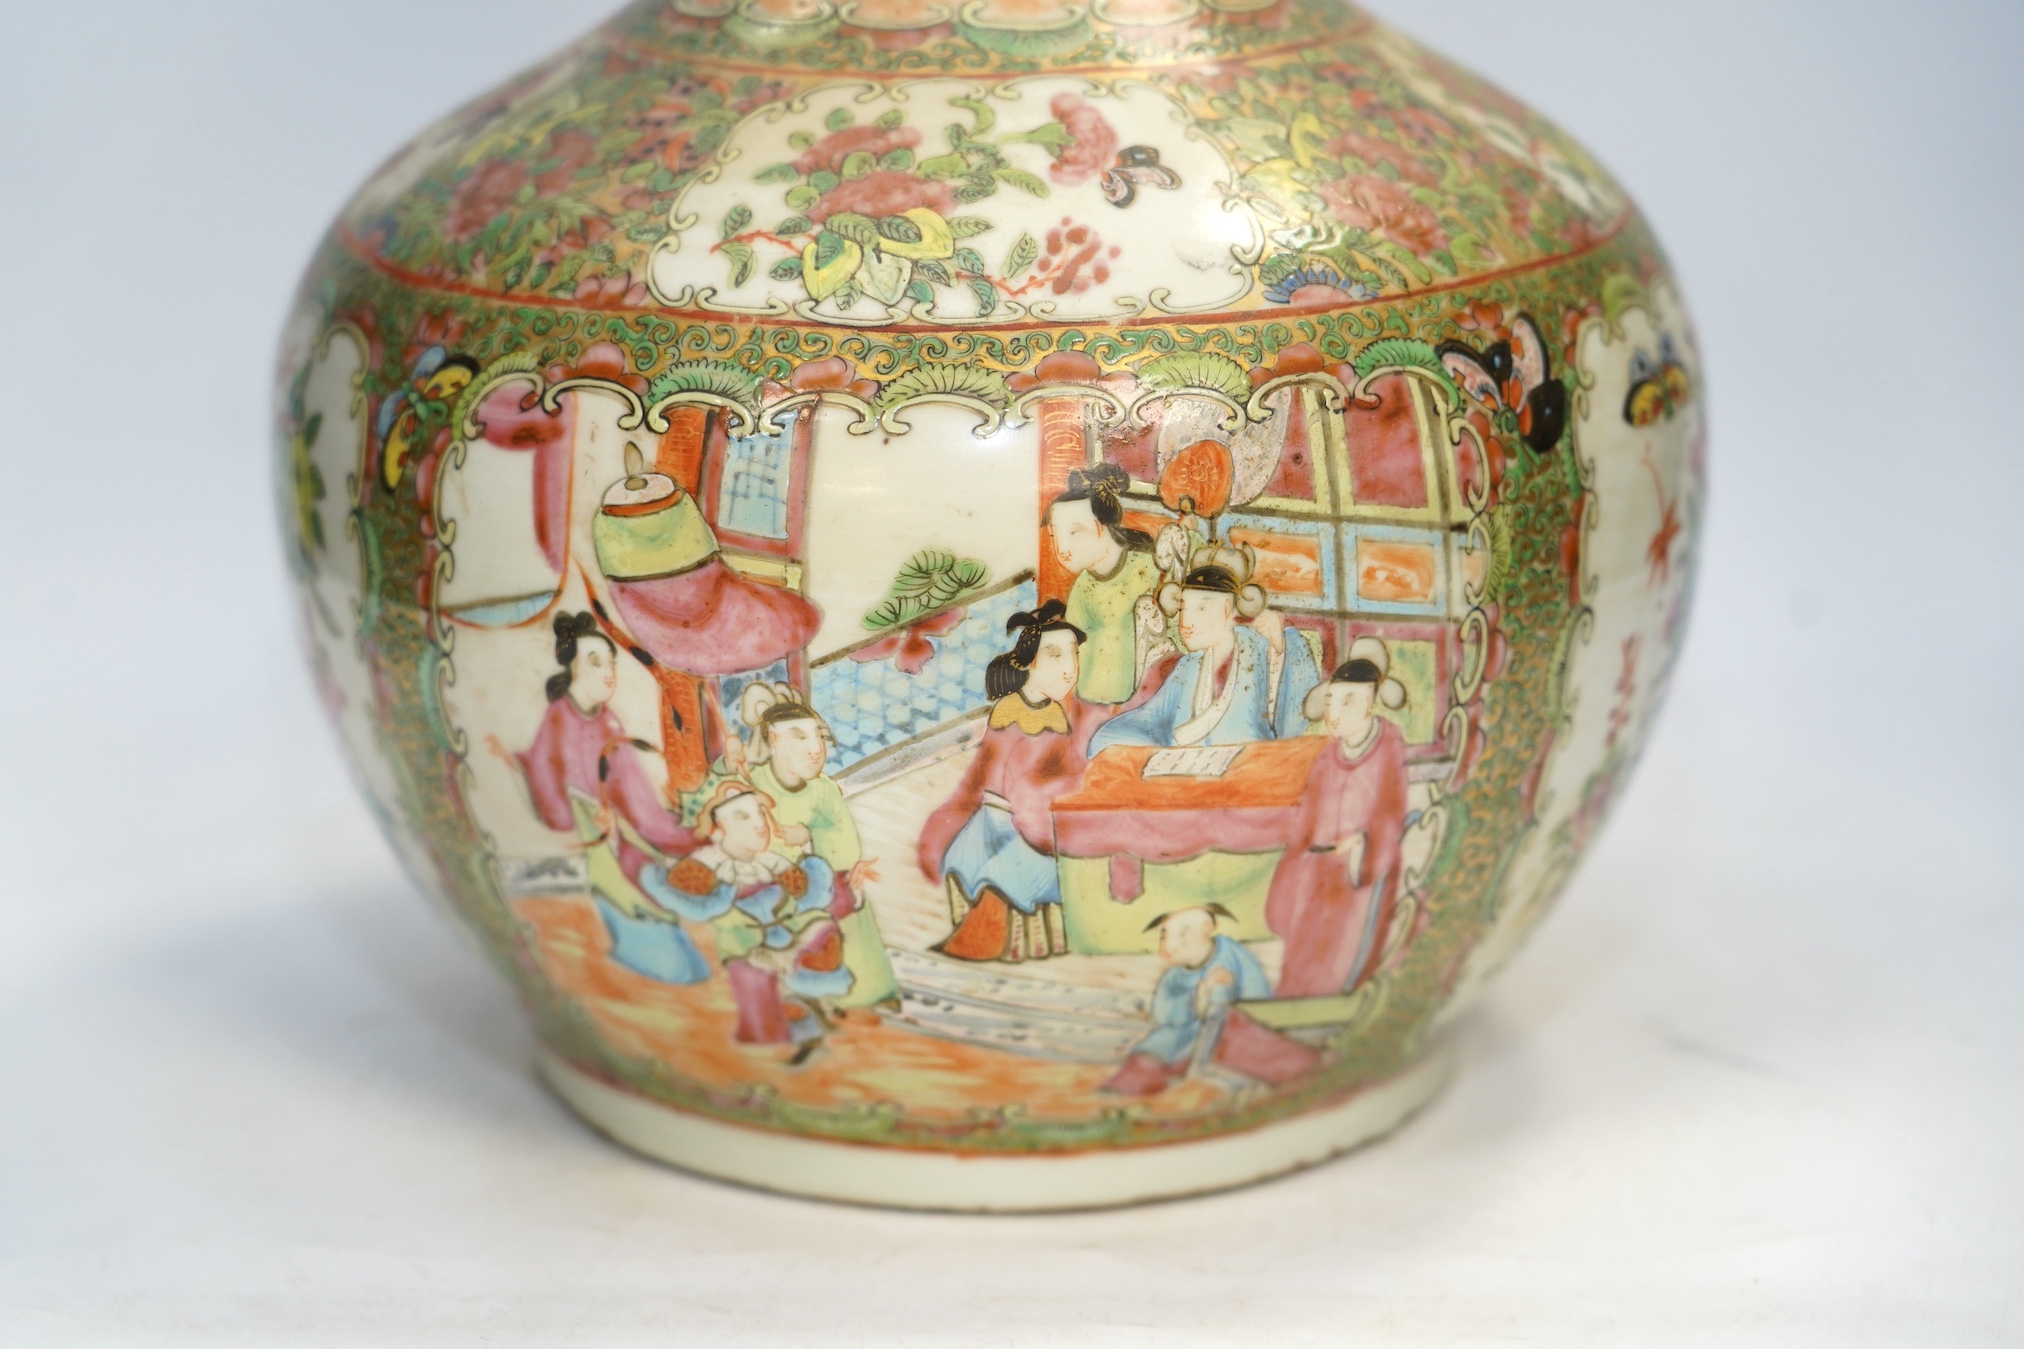 A Chinese famille rose vase, 39cm high. Condition - fair, some chipping to rim and very grubby